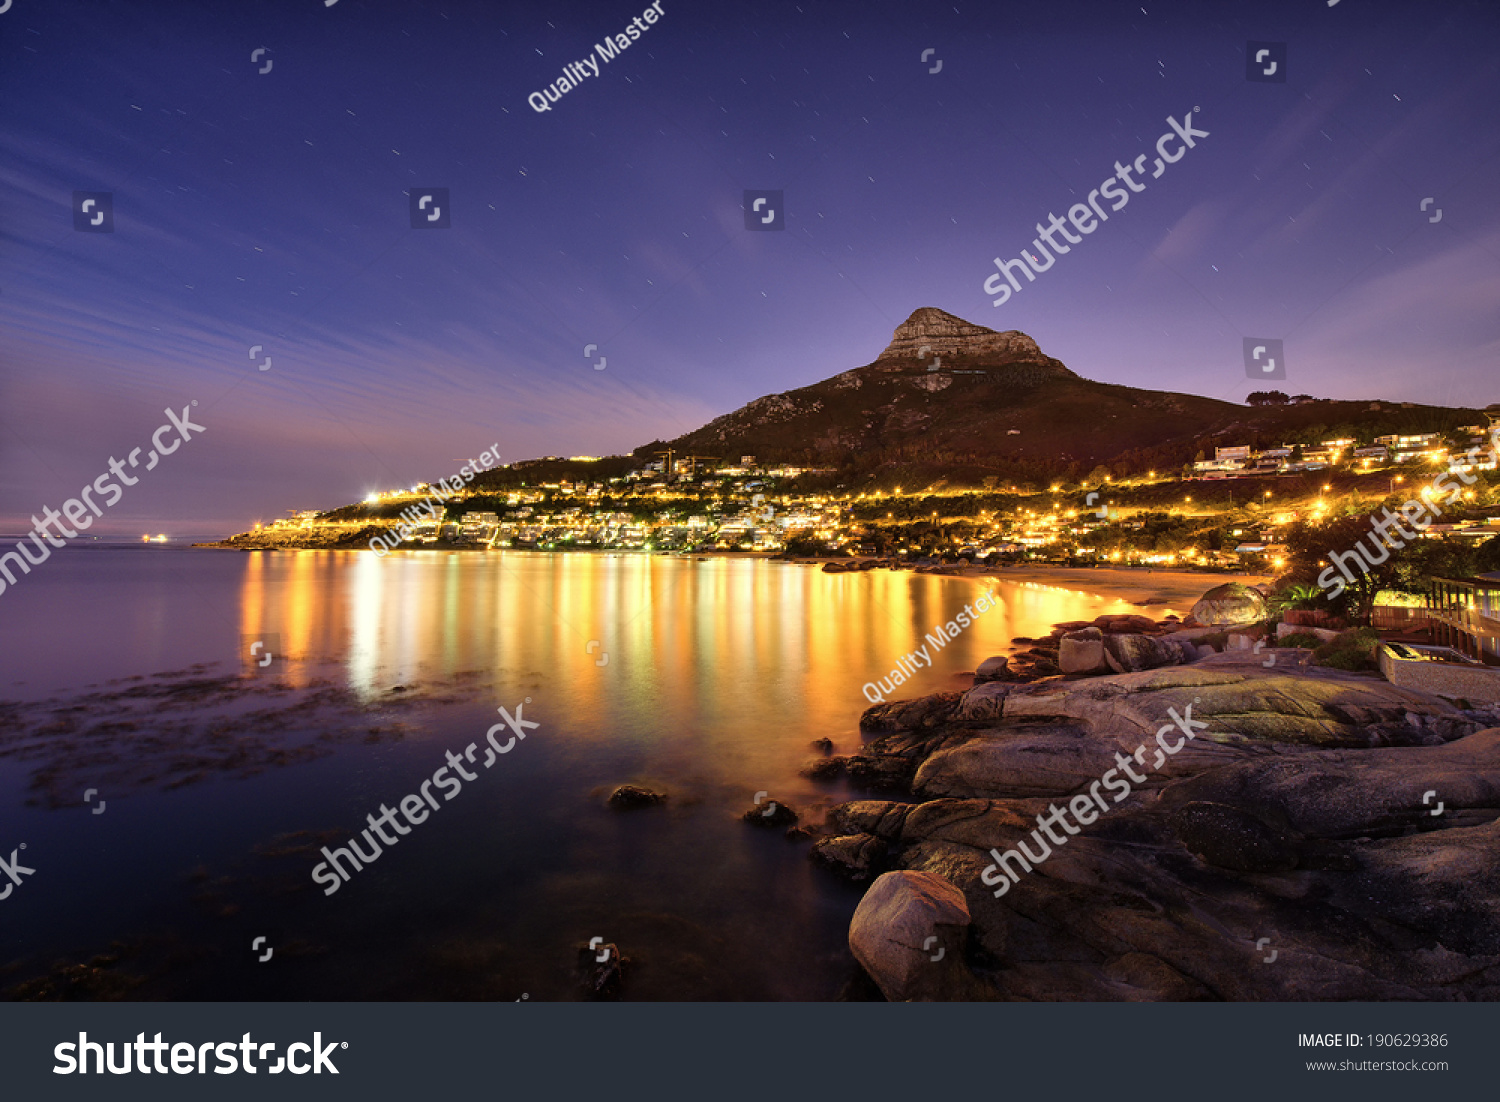 Cape Town's Table Mountain, Lions head & Twelve Apostles are popular hiking destinations for both locals and tourists all year round. #190629386